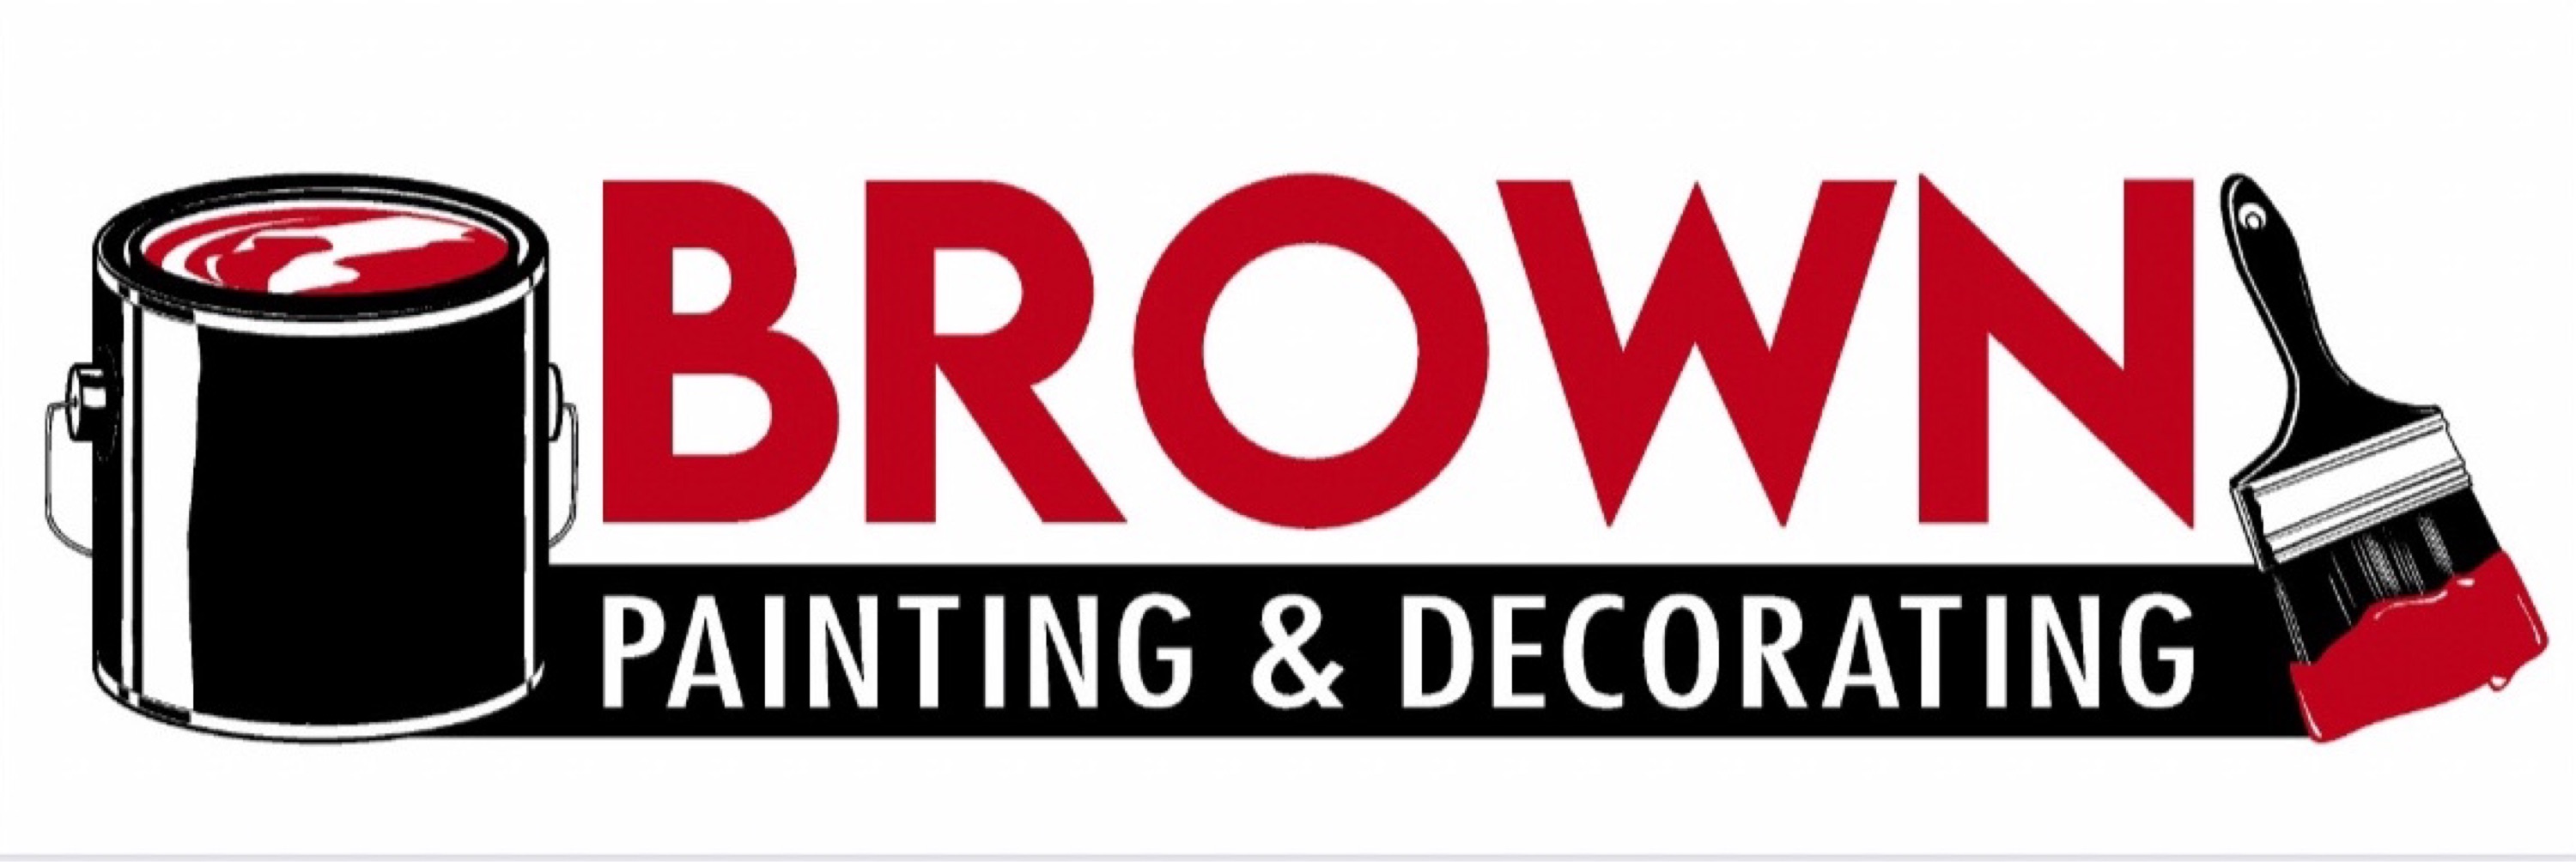 Brown Painting and Decorating, LLC Logo